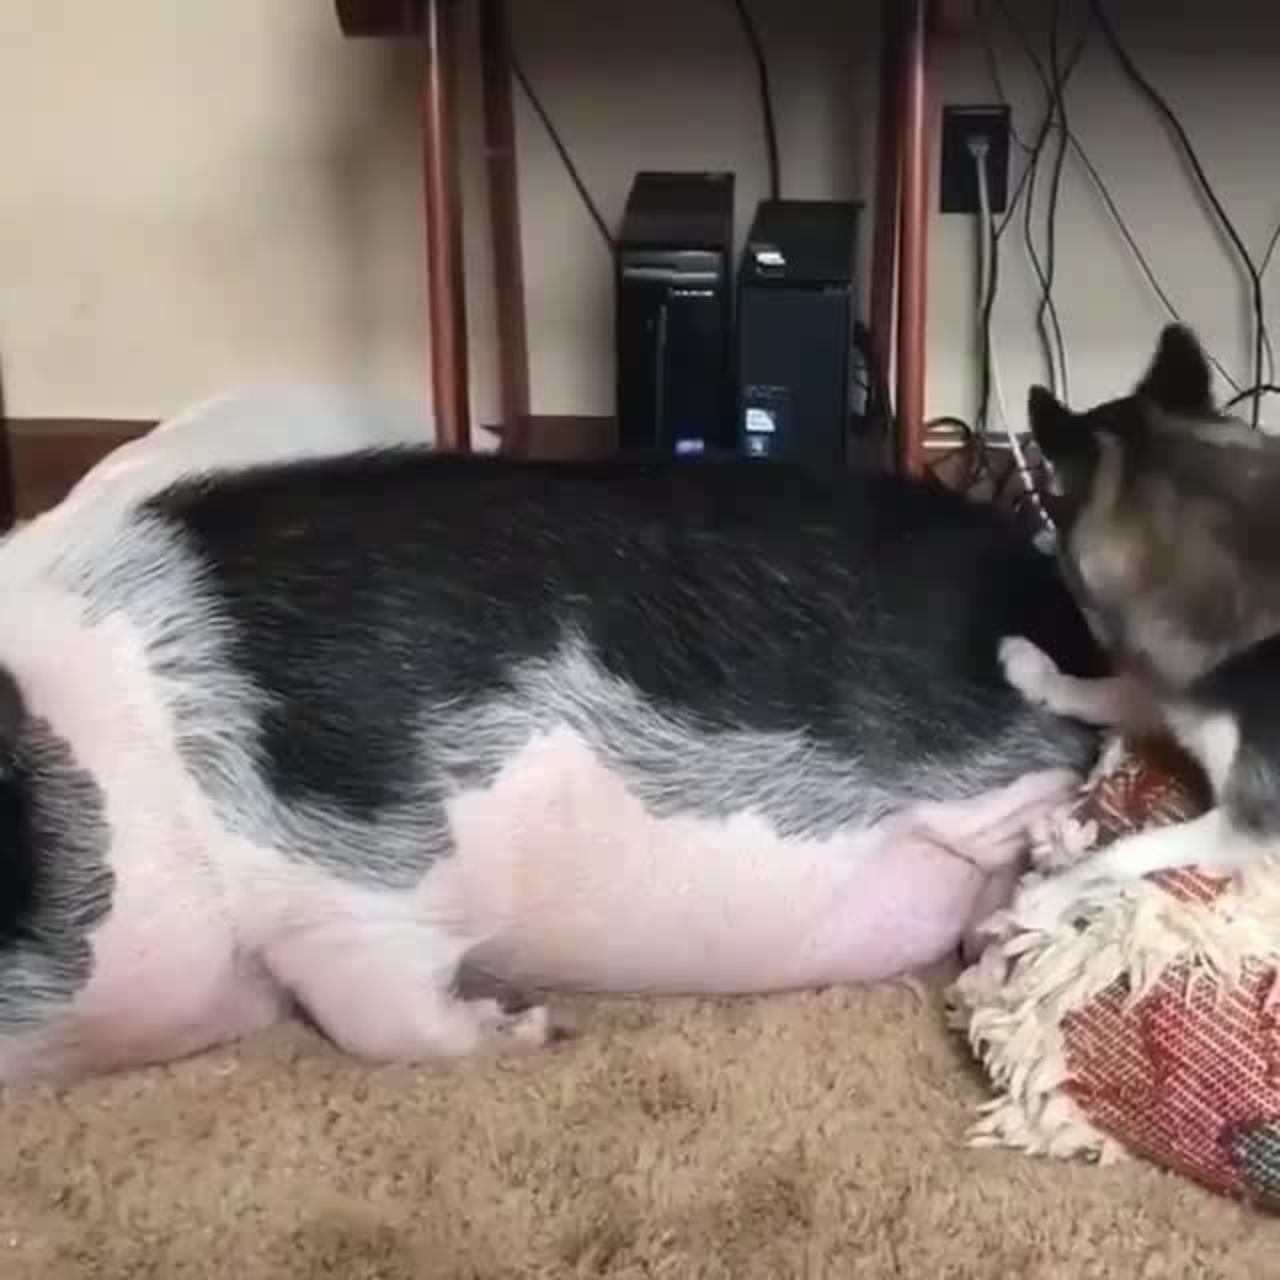 Piggy was riding on the back of the dog